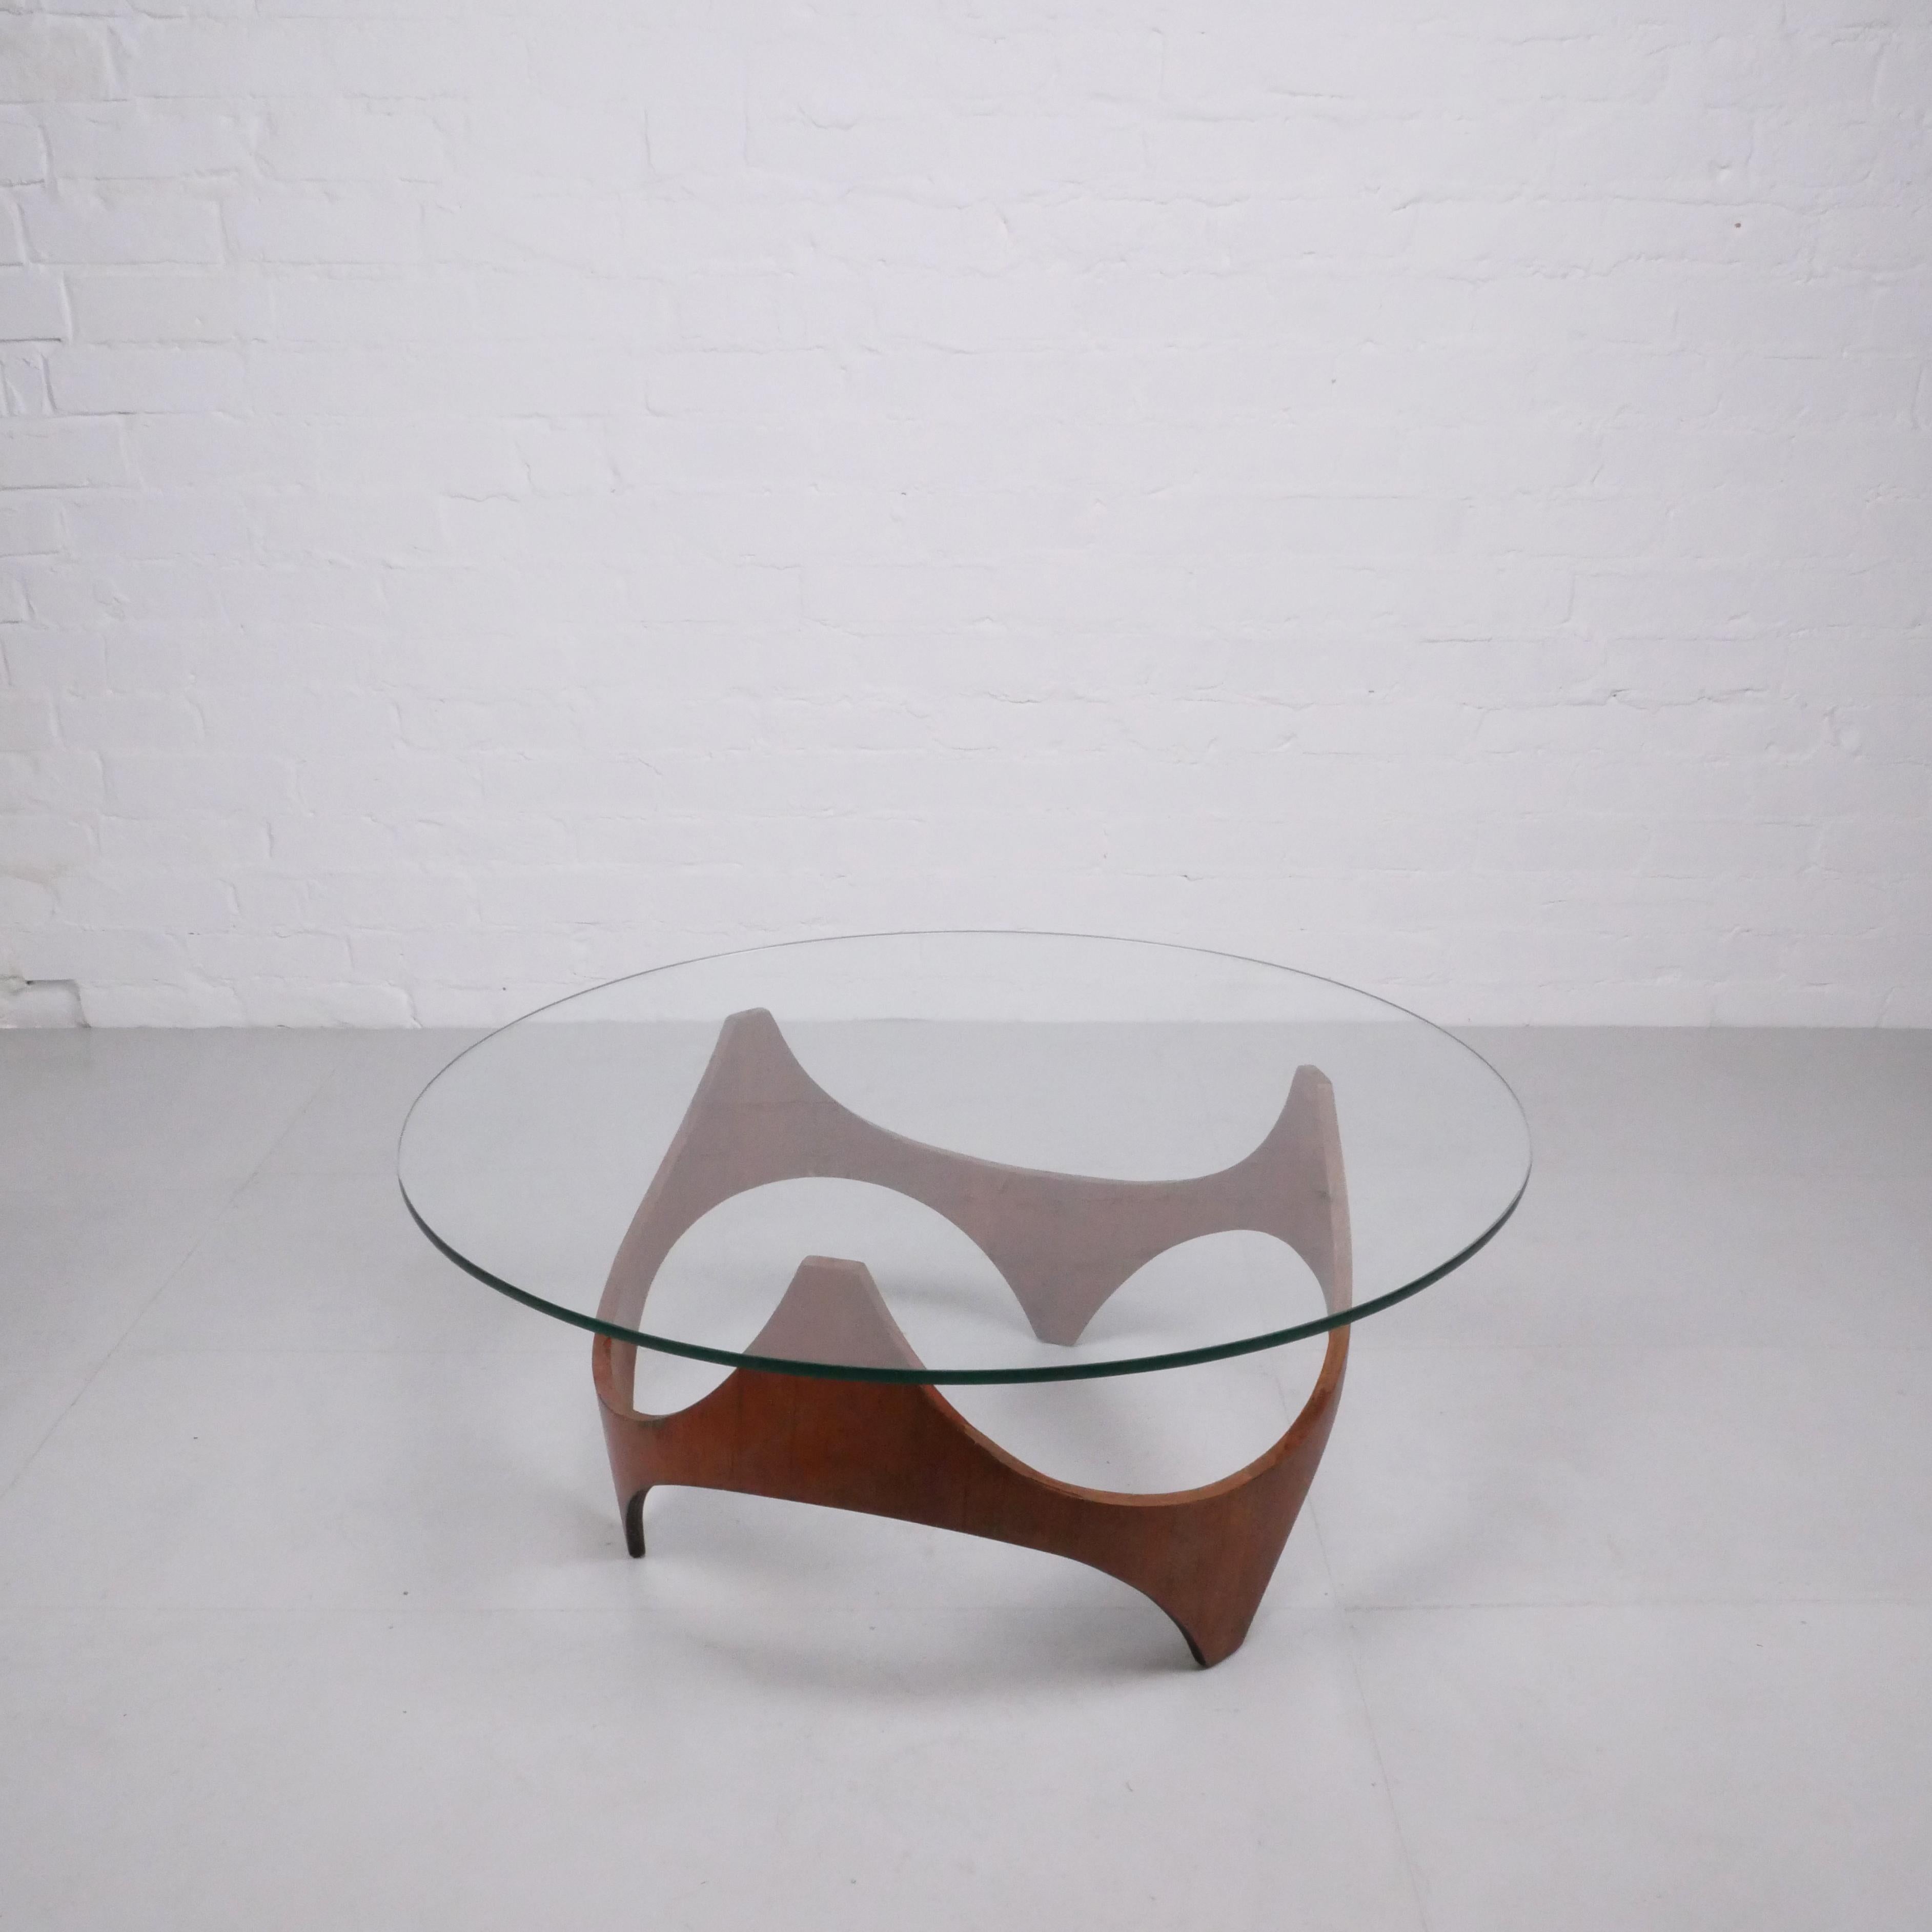 Glass & Plywood Coffee Table, Style of Henry P Glass, Joe Colombo Gerald Summers 4